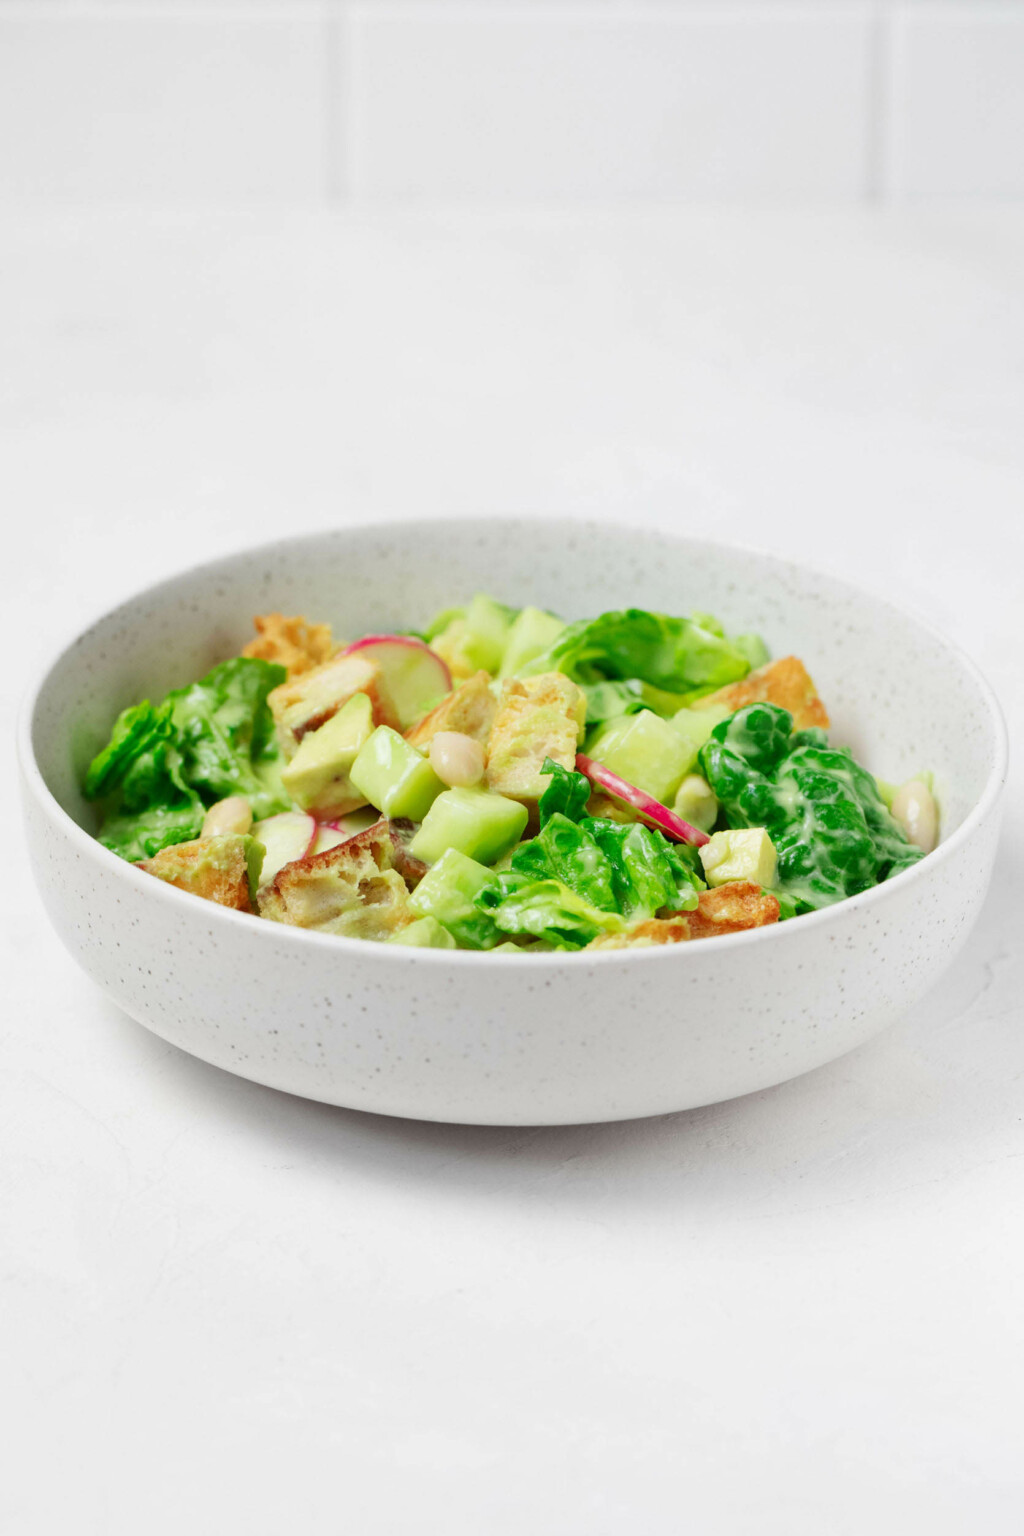 An image of a white bowl, which is filled with lettuces, white beans, radishes, avocado, and a creamy green dressing.